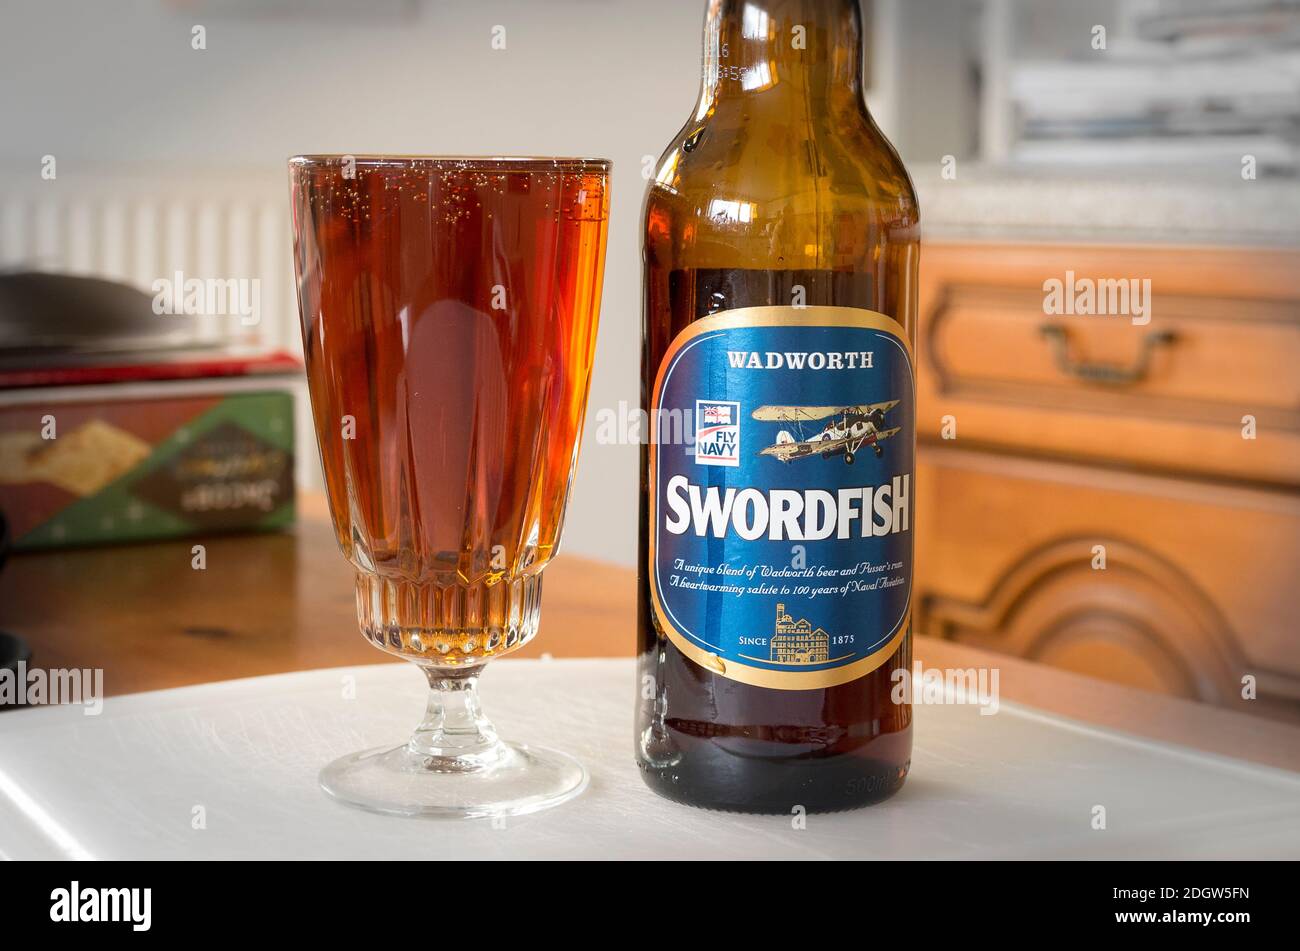 A poured glass of Wadworth Swordfish bitter ale ready to drink in an English home Stock Photo